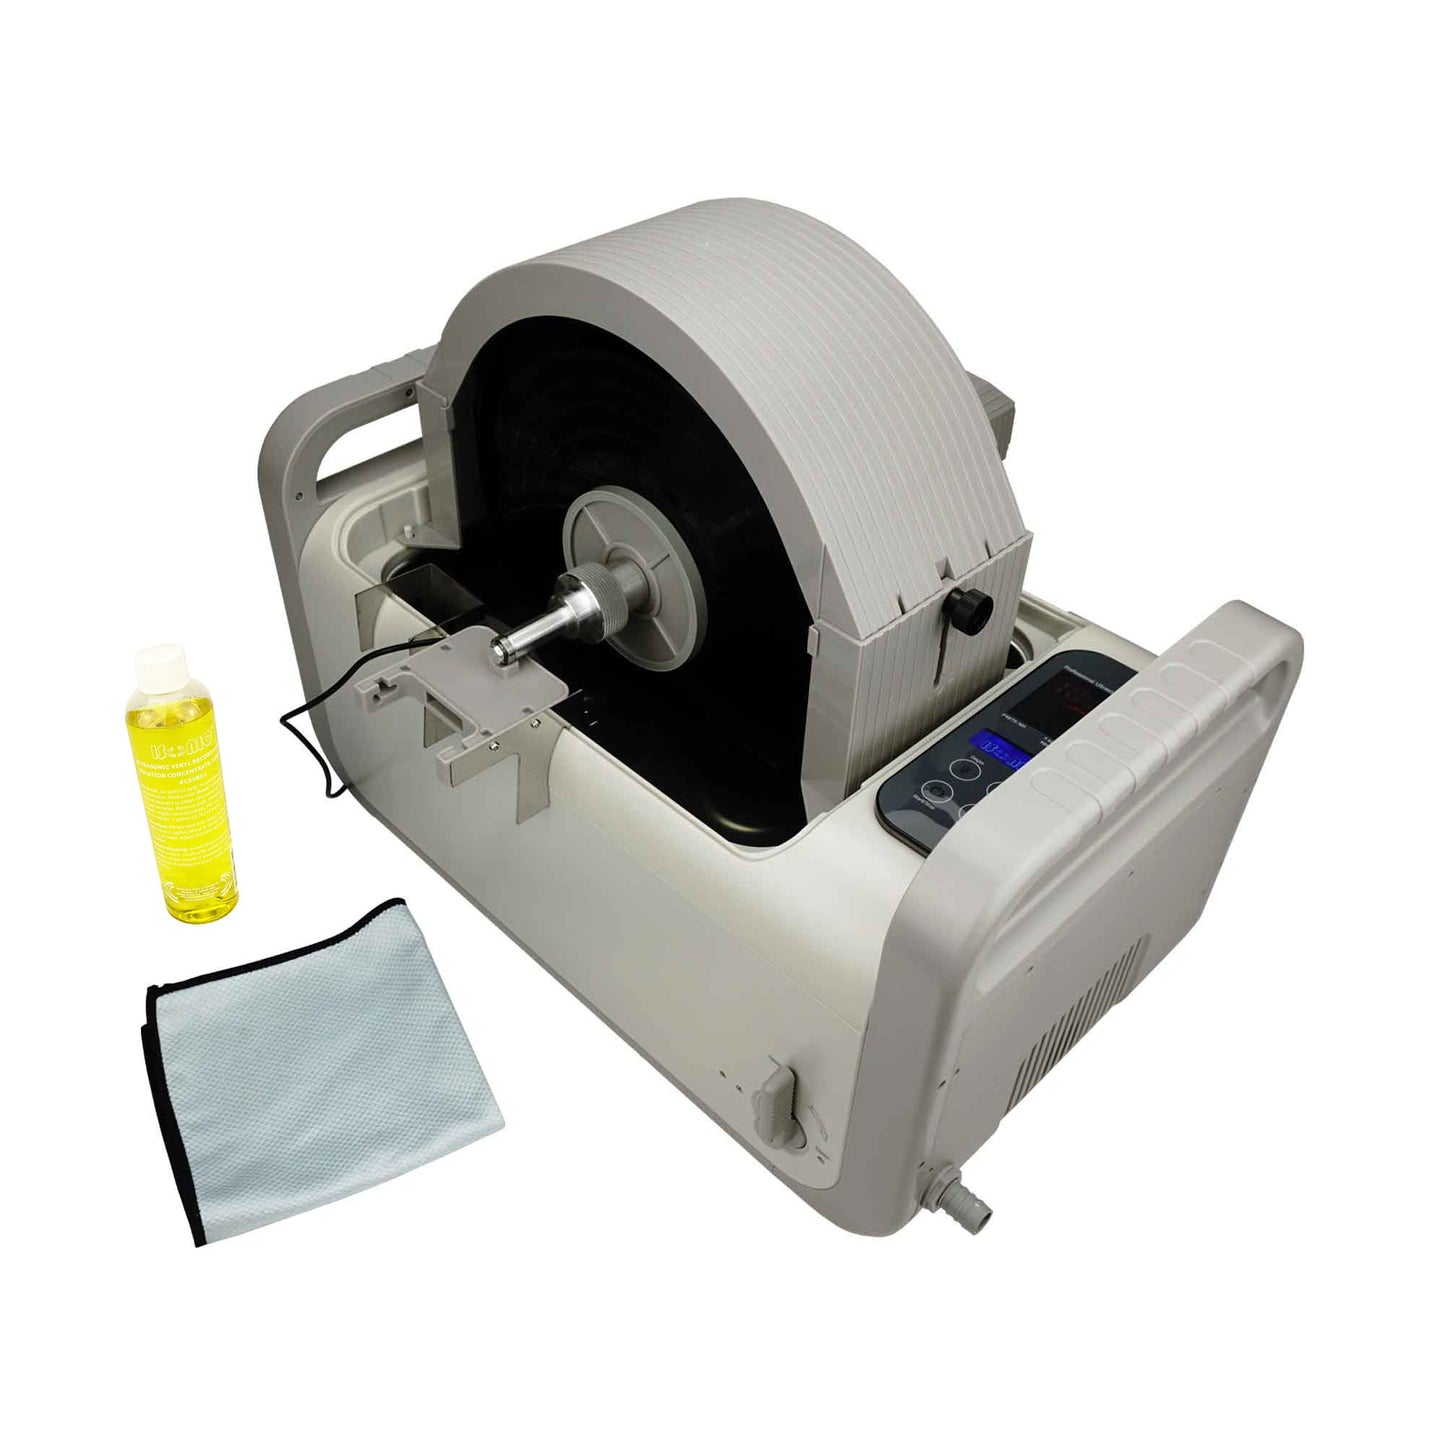 P4875-NH+MVR10  iSonic® Ultrasonic Vinyl Record Cleaner for 10-LPs, 2 –  iSonic Inc.